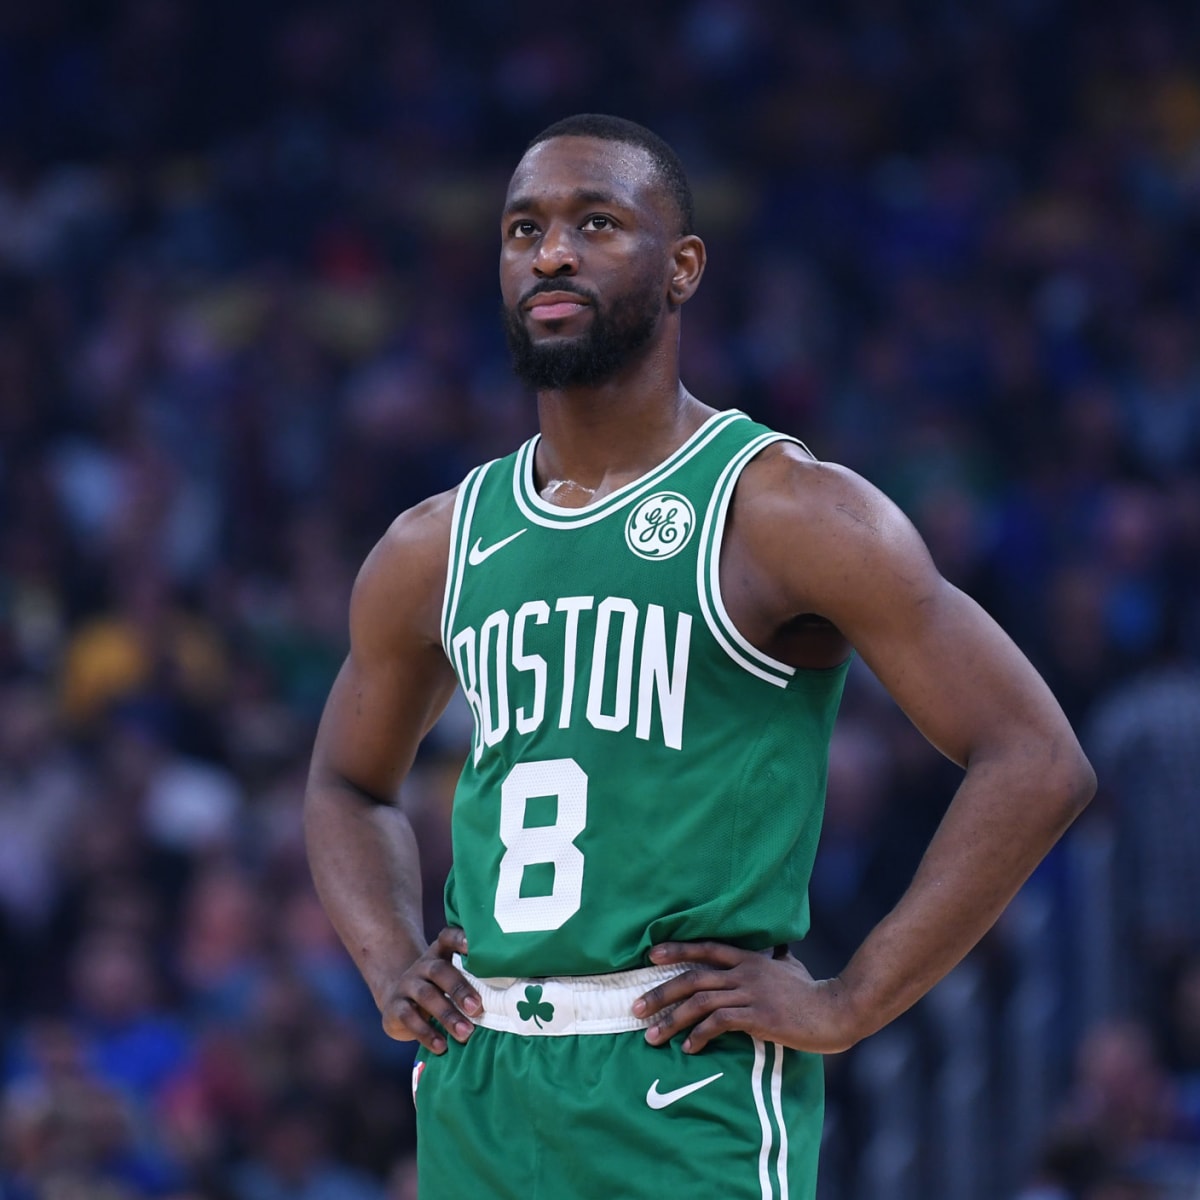 Celtics star Kemba Walker dishes out a special assist to Boston's